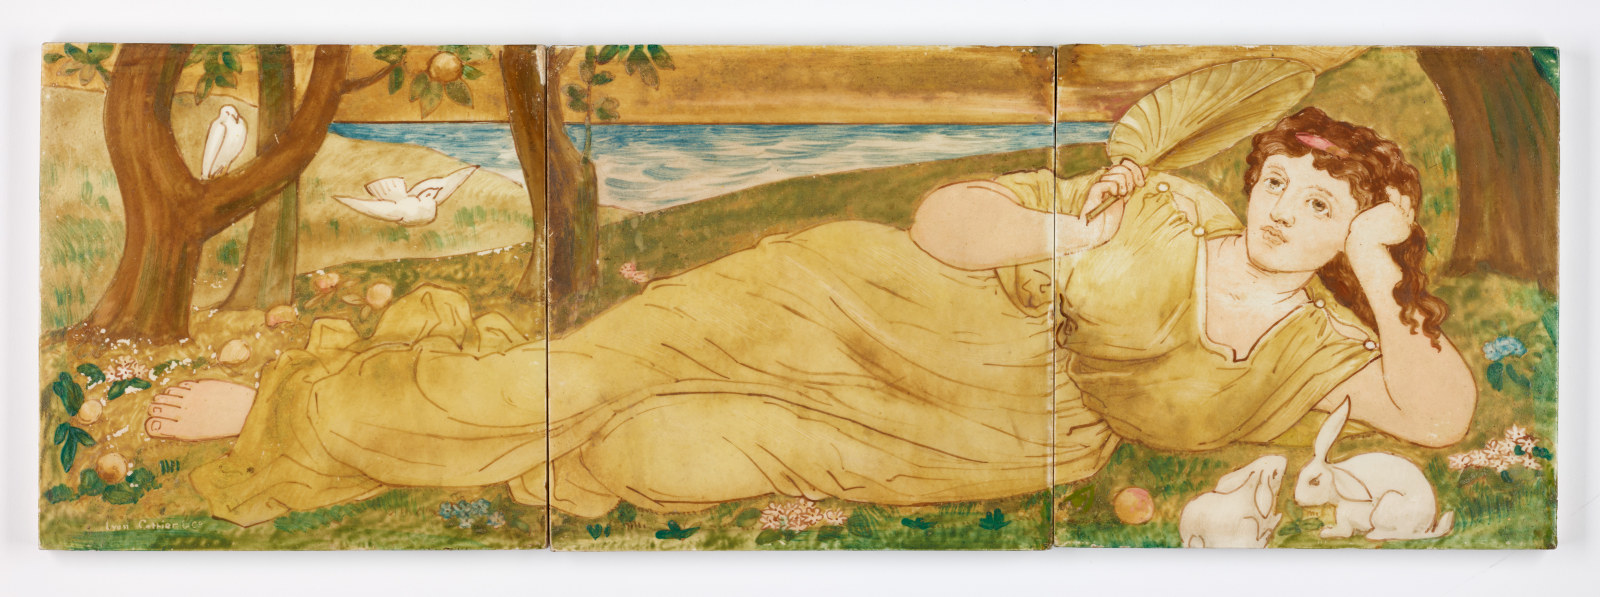 Hand painted tile showing the middle section of reclining figure in landscape.